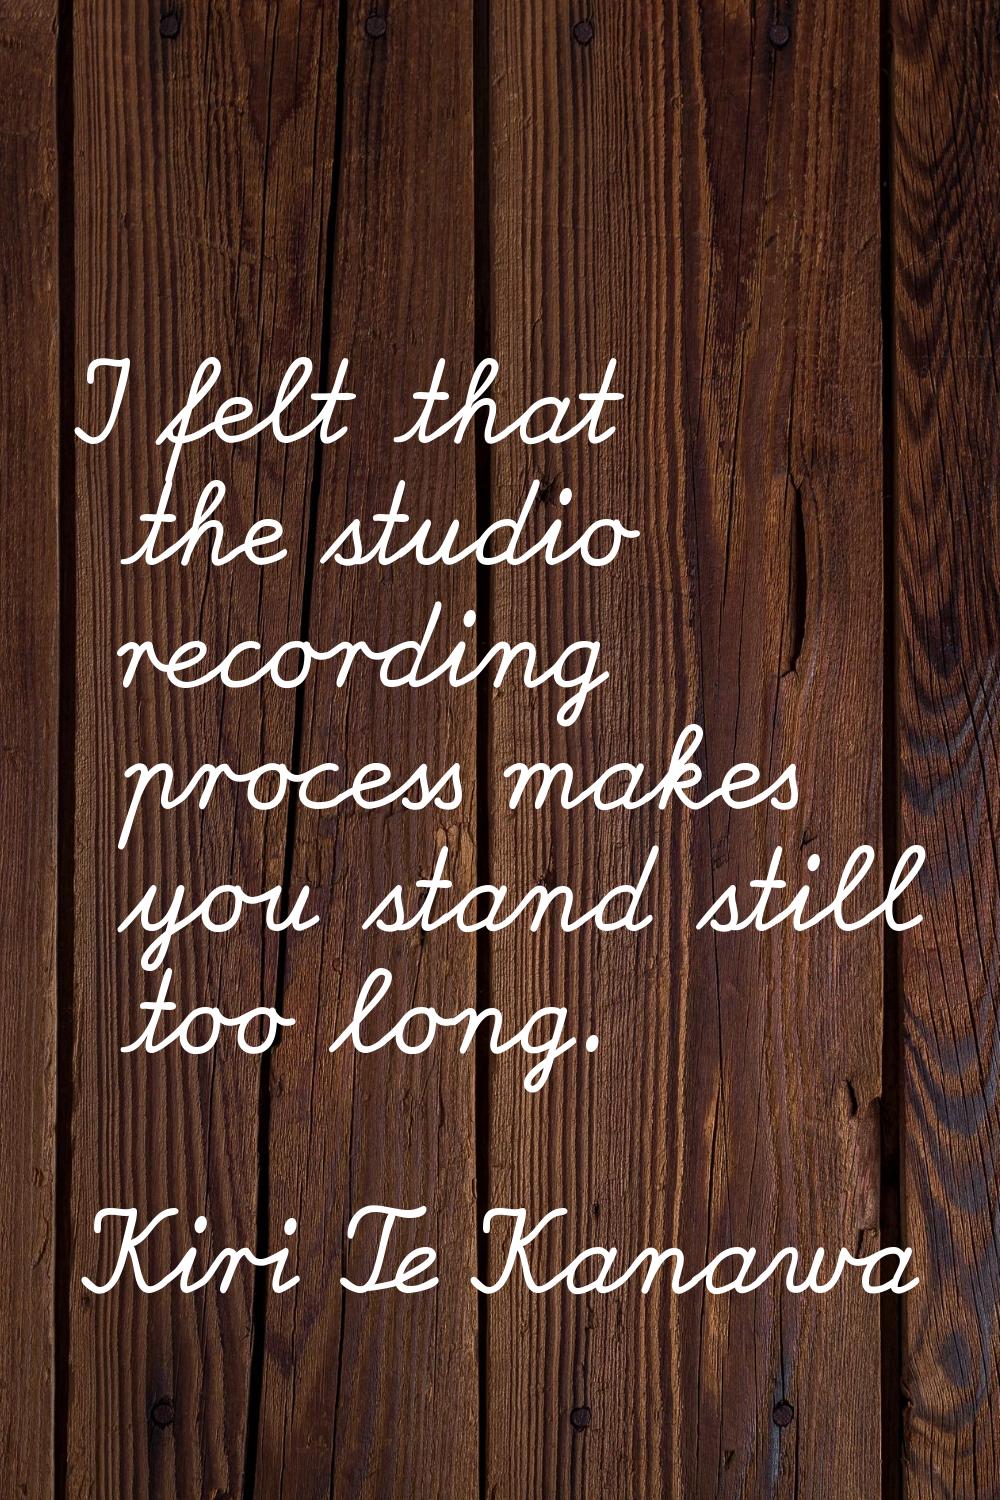 I felt that the studio recording process makes you stand still too long.